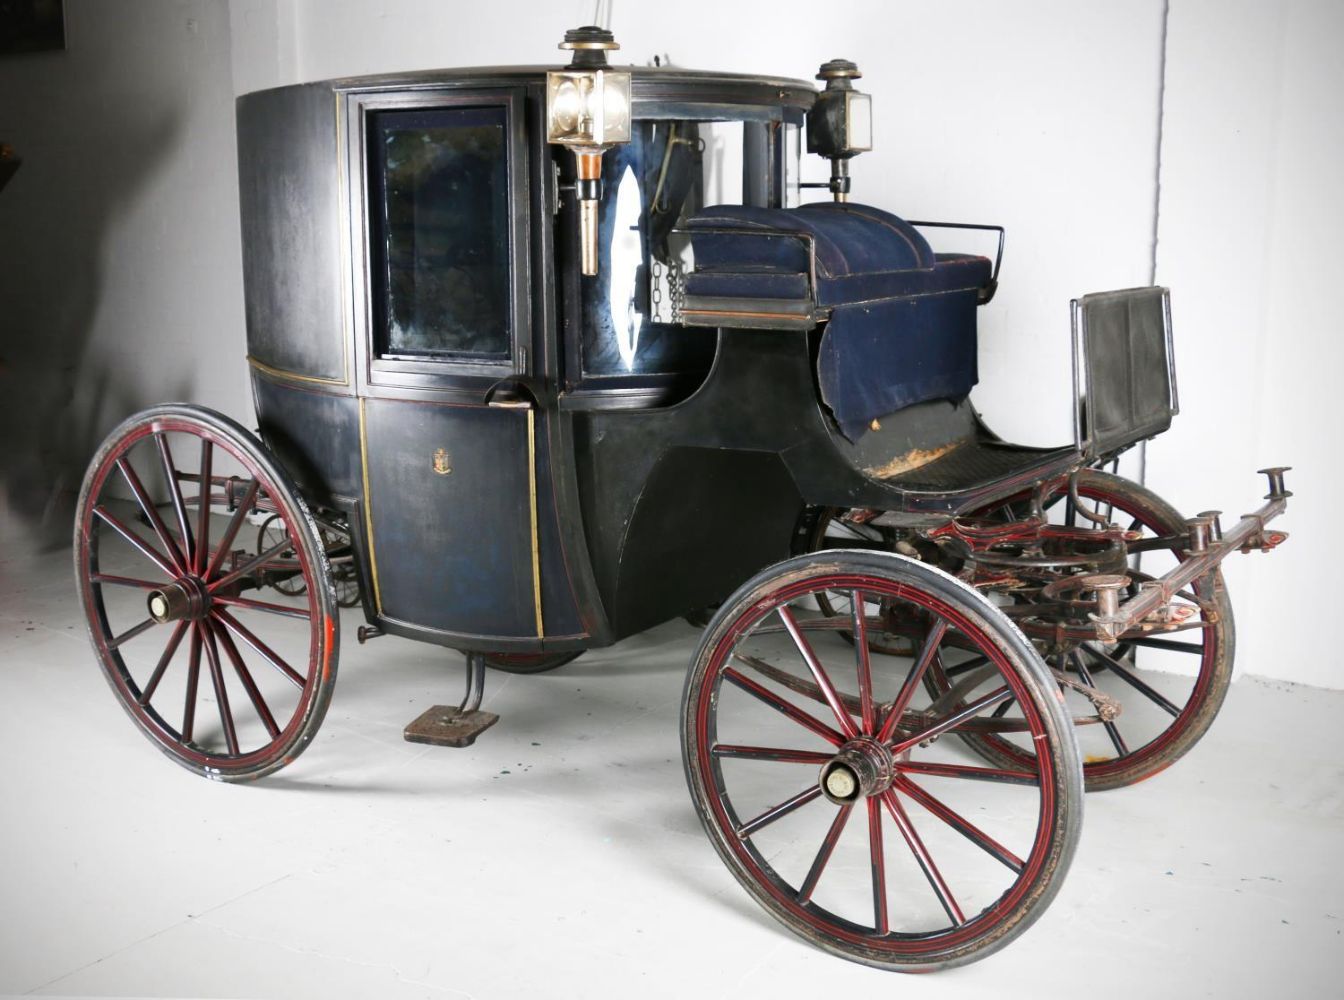 CARLISLE: The Gretna Green Collection of Carriages and Coaches